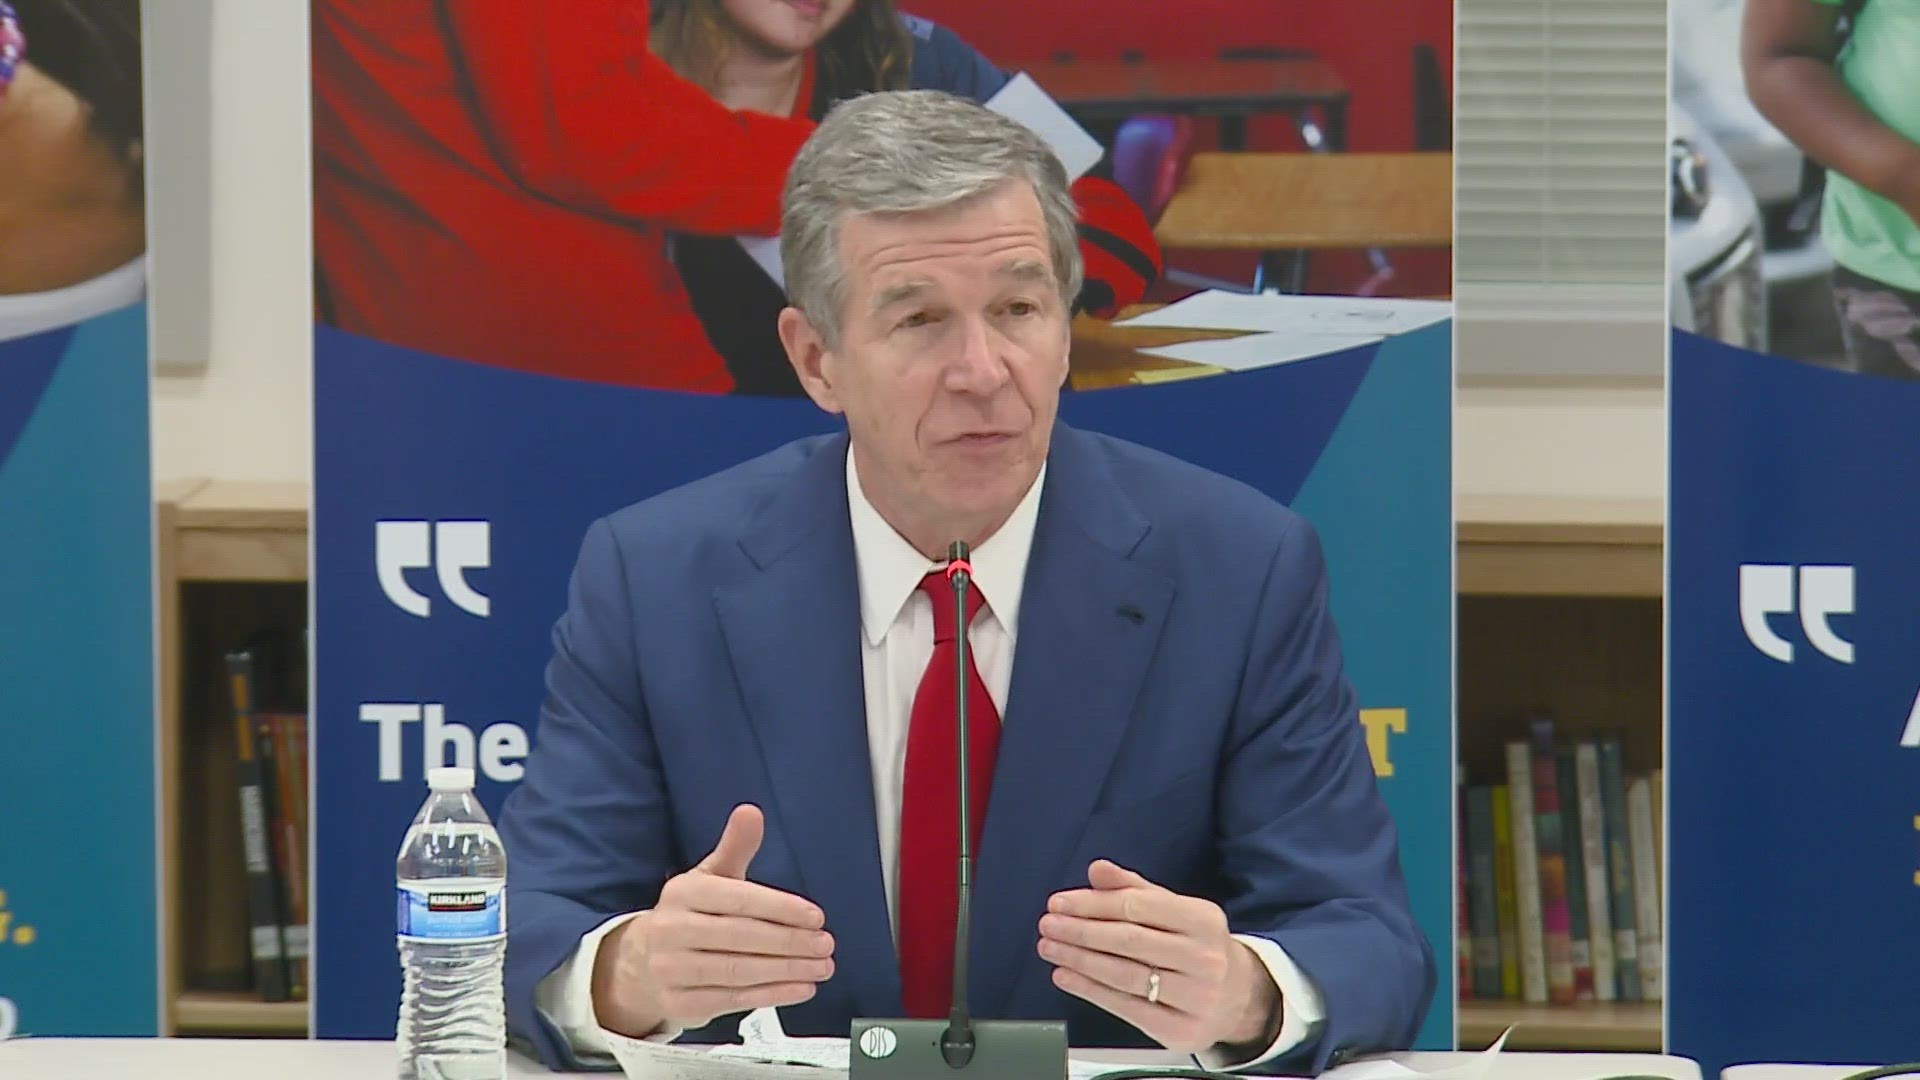 The Governor is urging North Carolinians to get involved and advocate for public school funding.